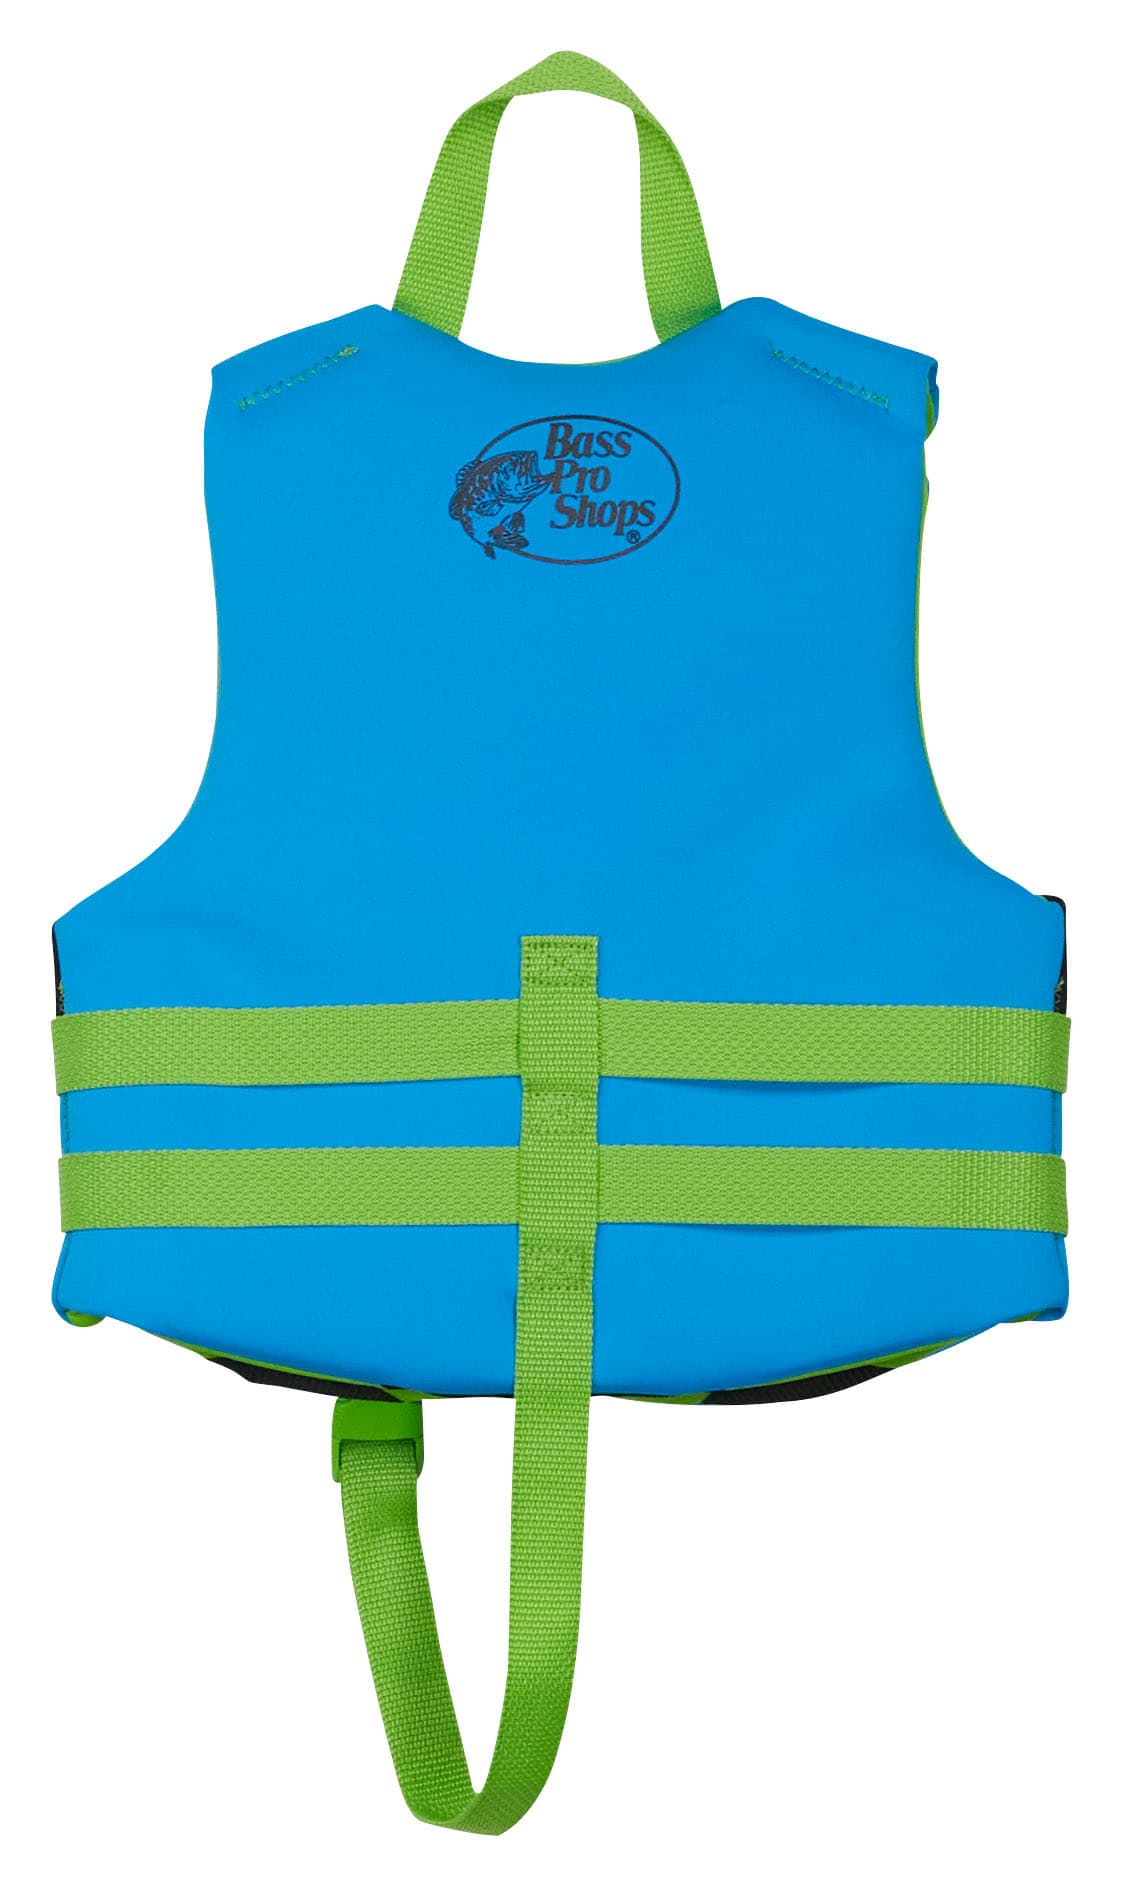 Bass Pro Shops® Neoprene Life Vest for Children and Youth